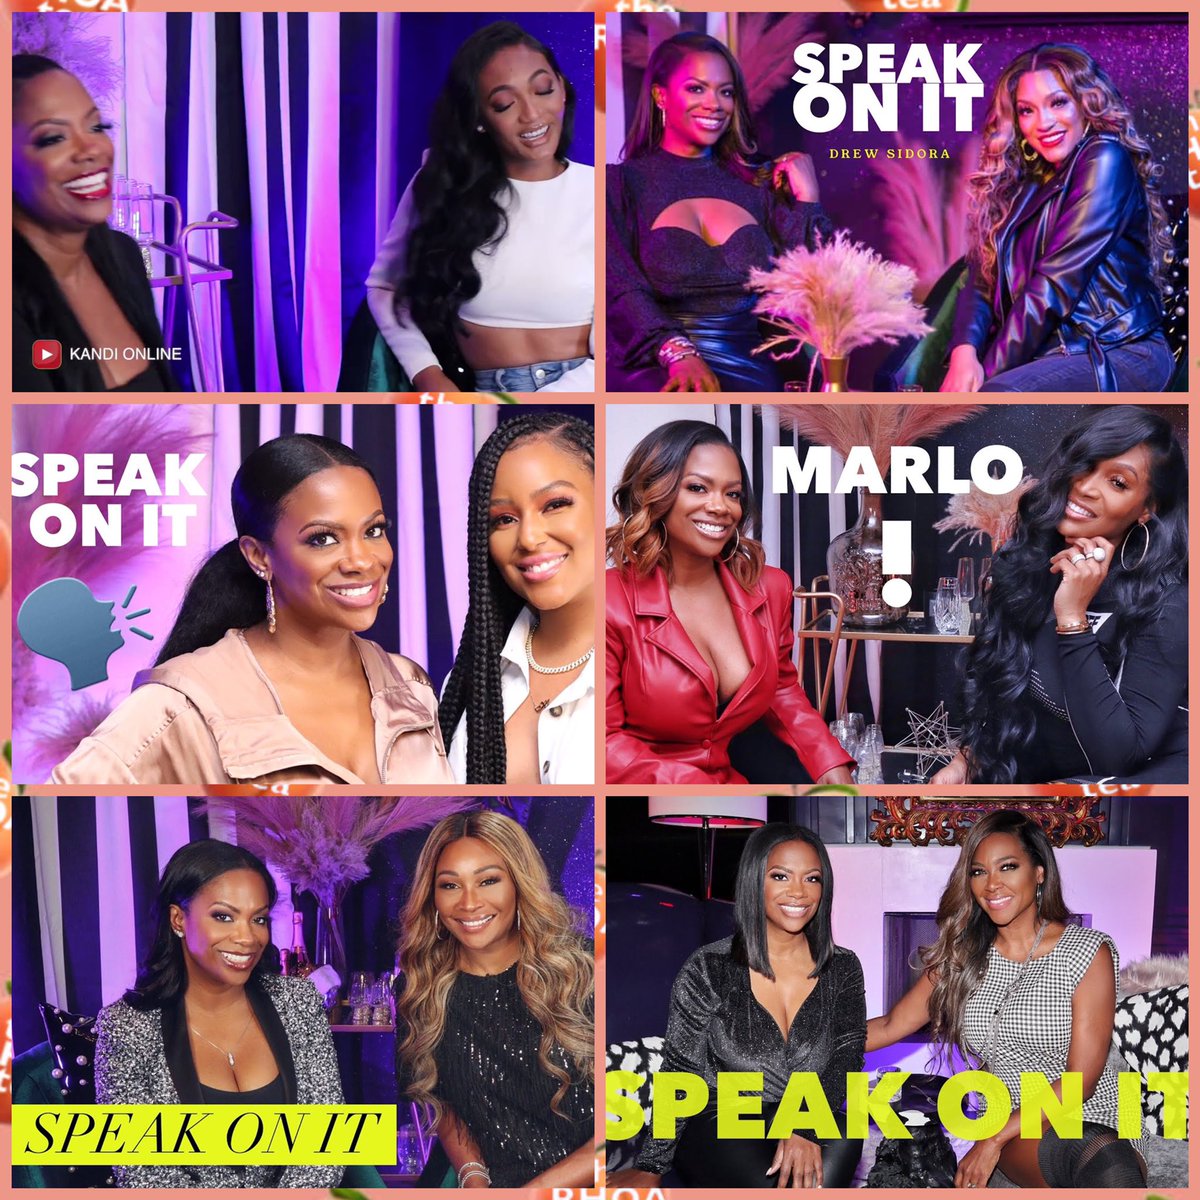 Can’t wait for Kandi to release more Speak on it episodes with some of the ...